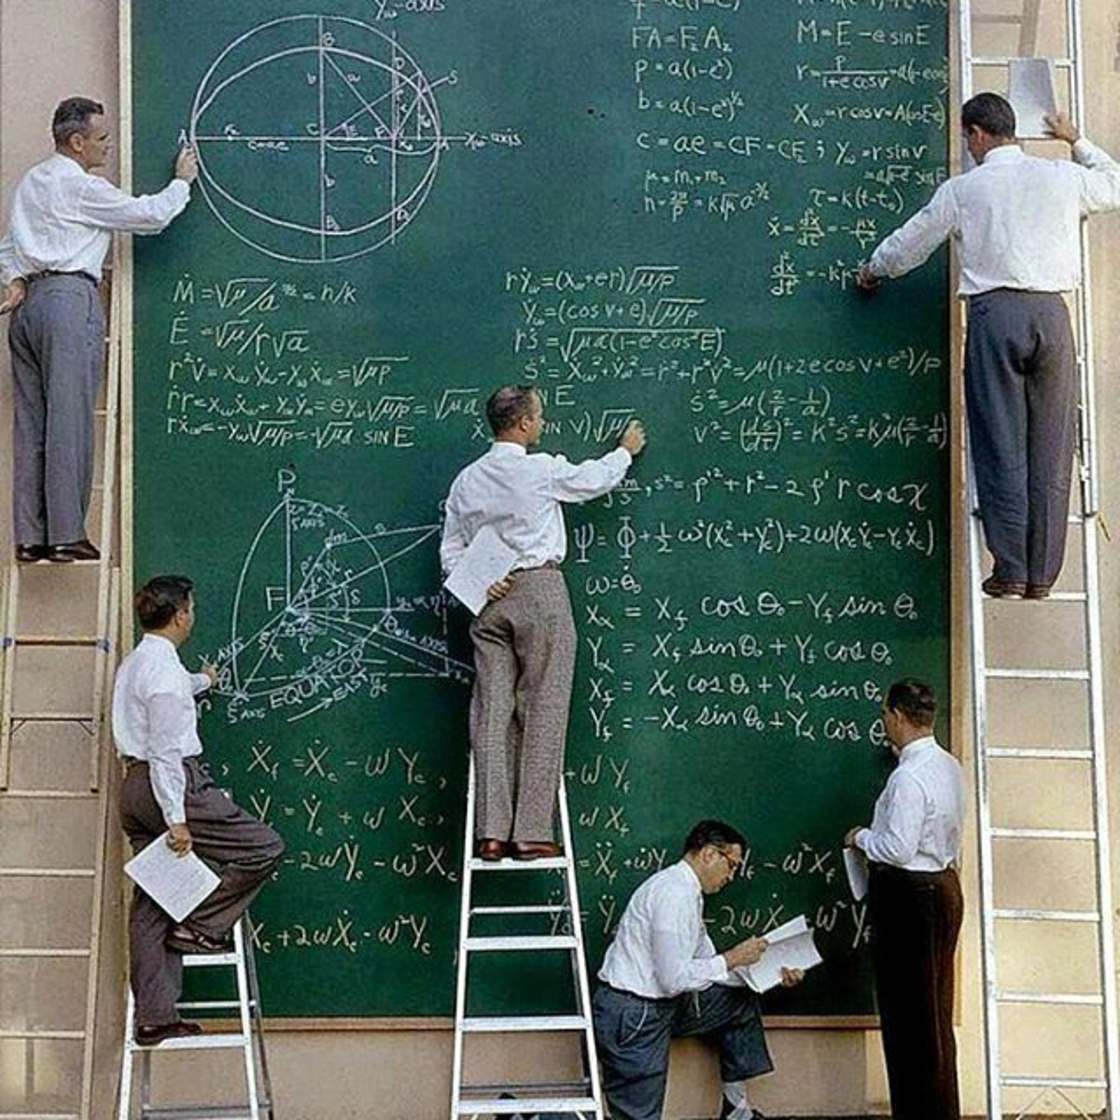 trying to arrange plans in a group chat